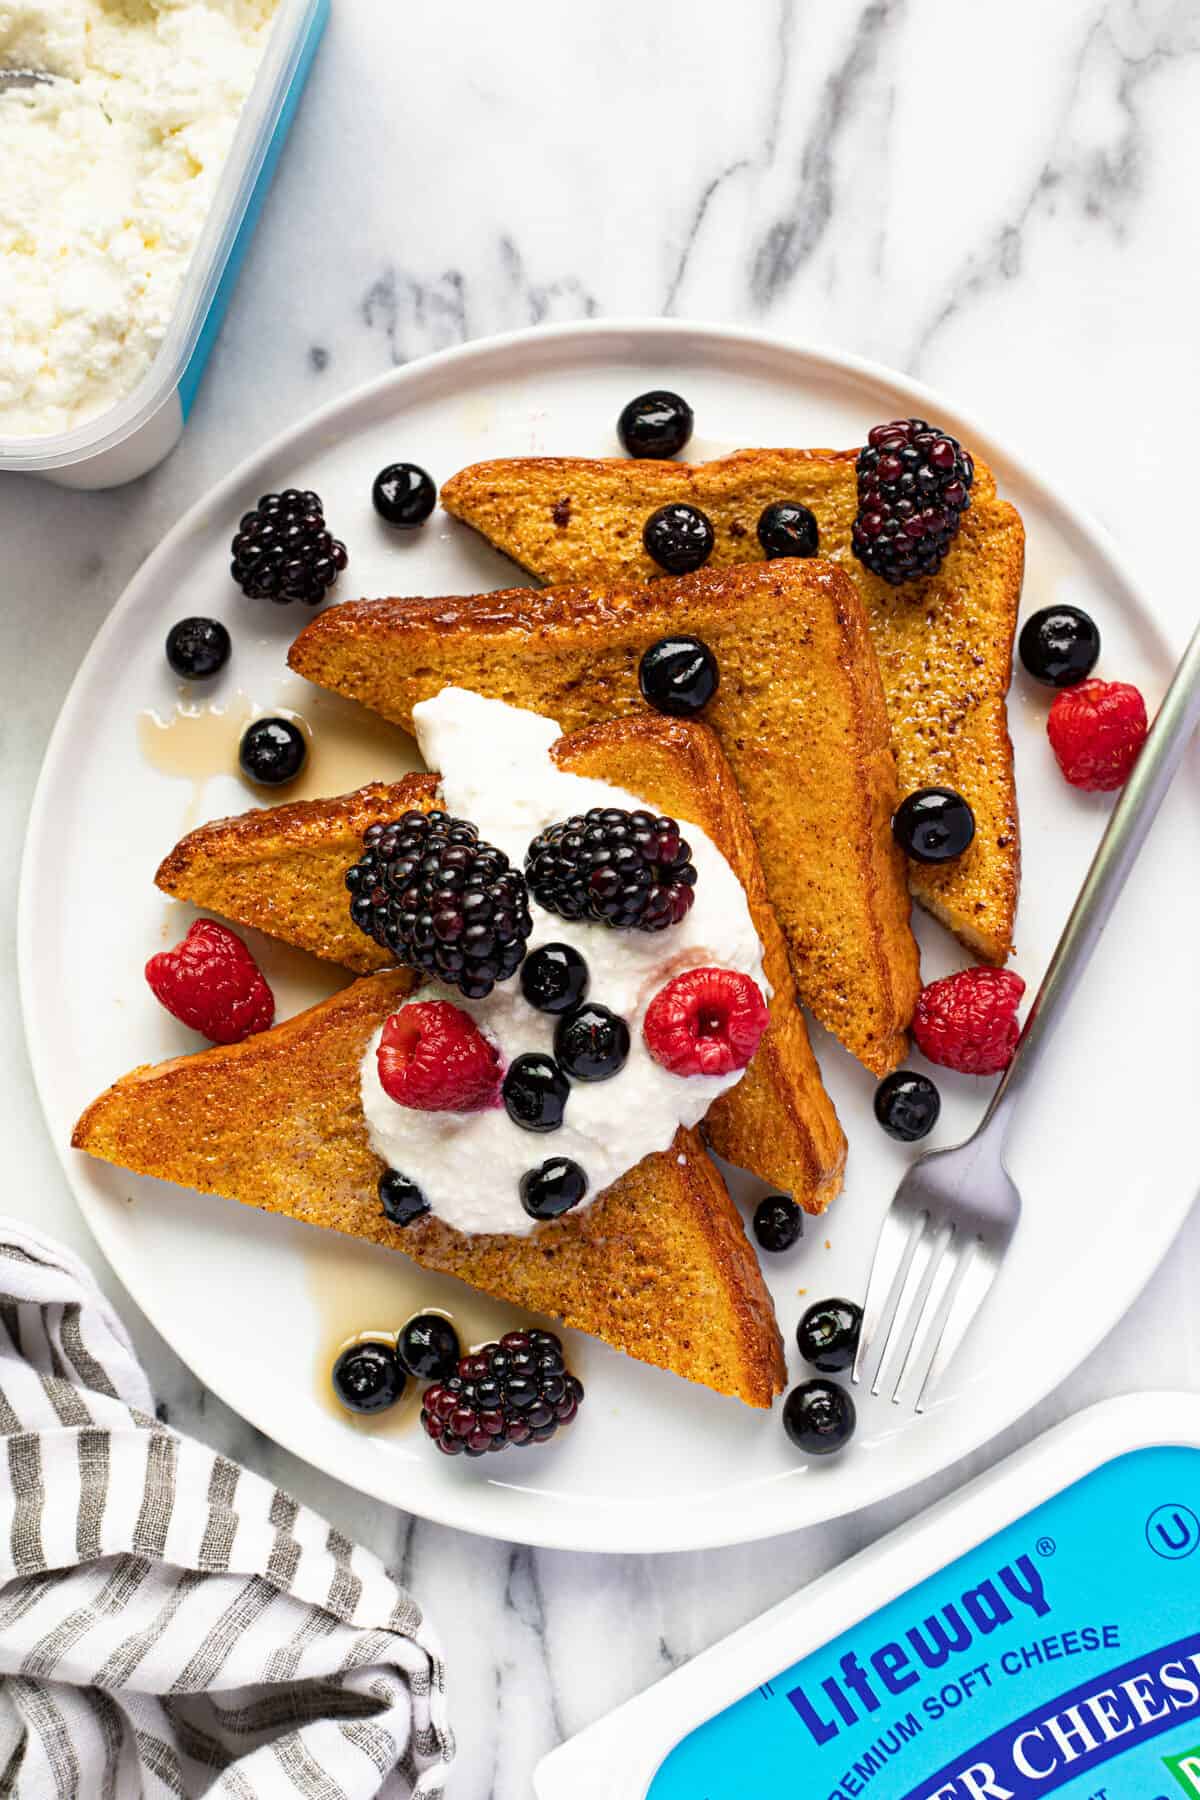 4 triangles of French toast on a white plate with berries and cream.